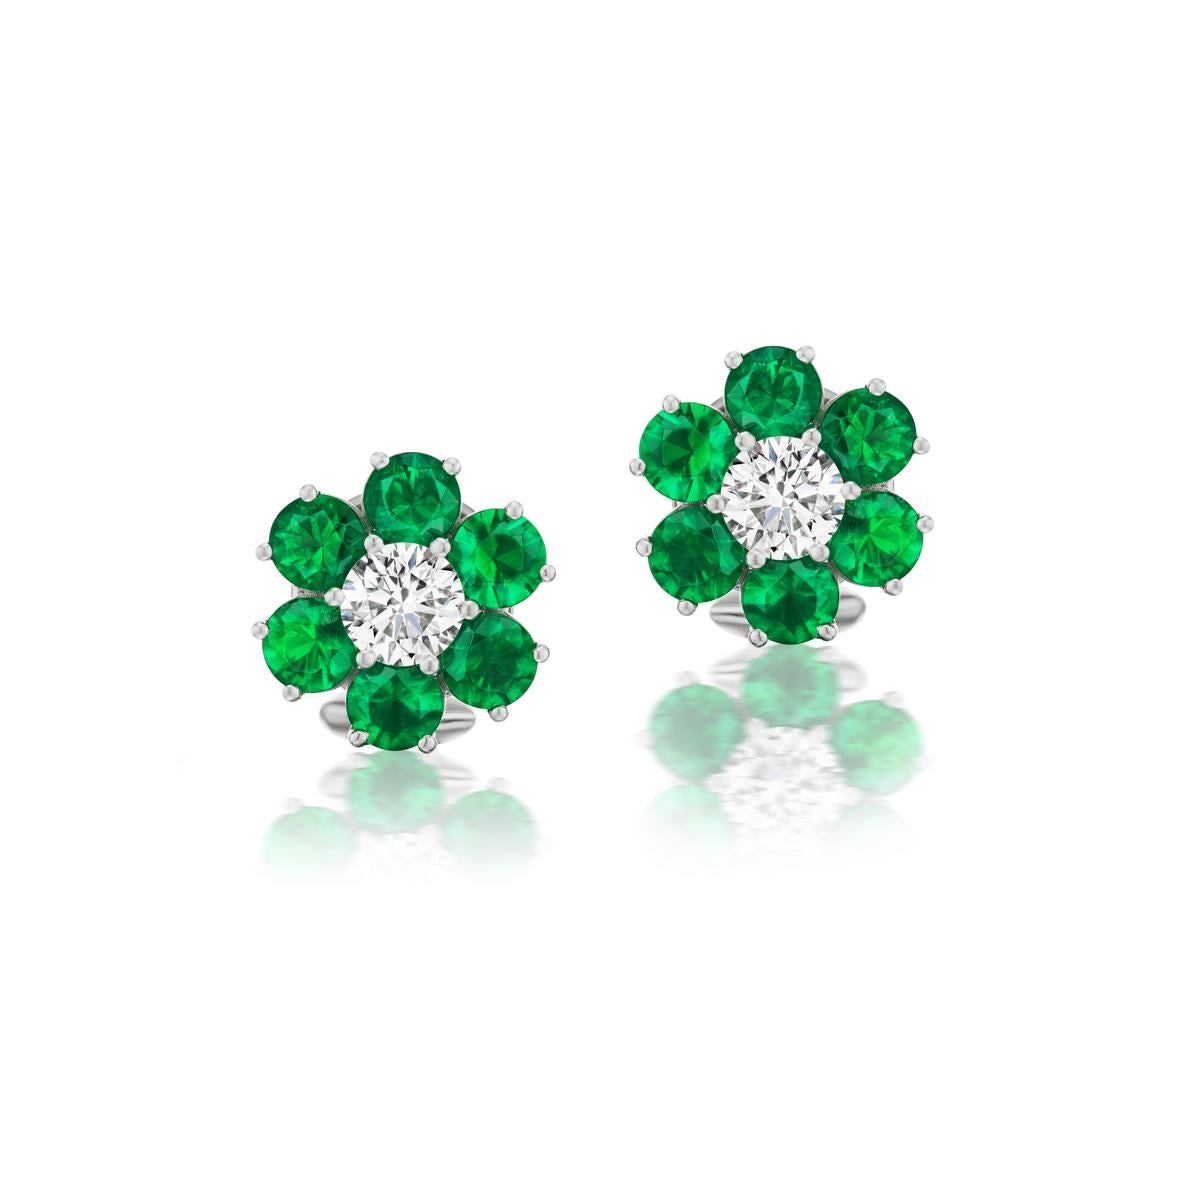 CHARMING EMERALD AND DIAMOND EARRING
Radiant green hued emeralds surround these precious diamonds to form a pleasant floral pattern in these emerald earrings

 Item:	# 04105
Metal:	Platinum
Lab:	         Gia
Color Weight:	2.45 ct.
Diamond